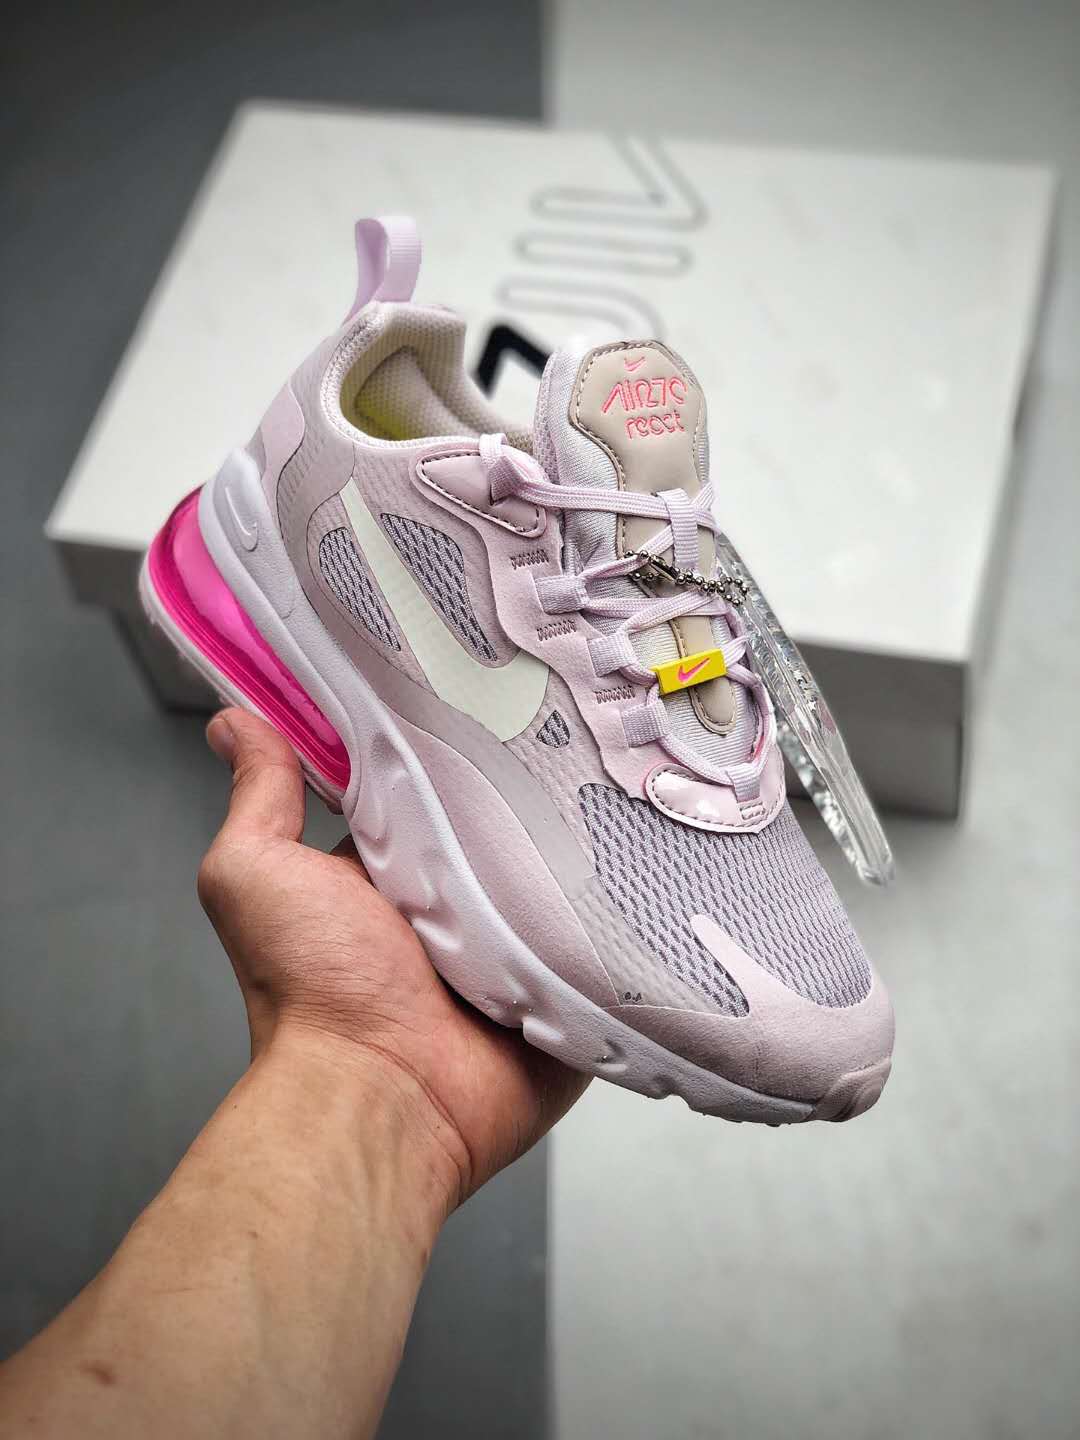 Nike Air Max 270 React Light Violet Digital Pink CZ0374-500 - Latest Release | Limited Edition